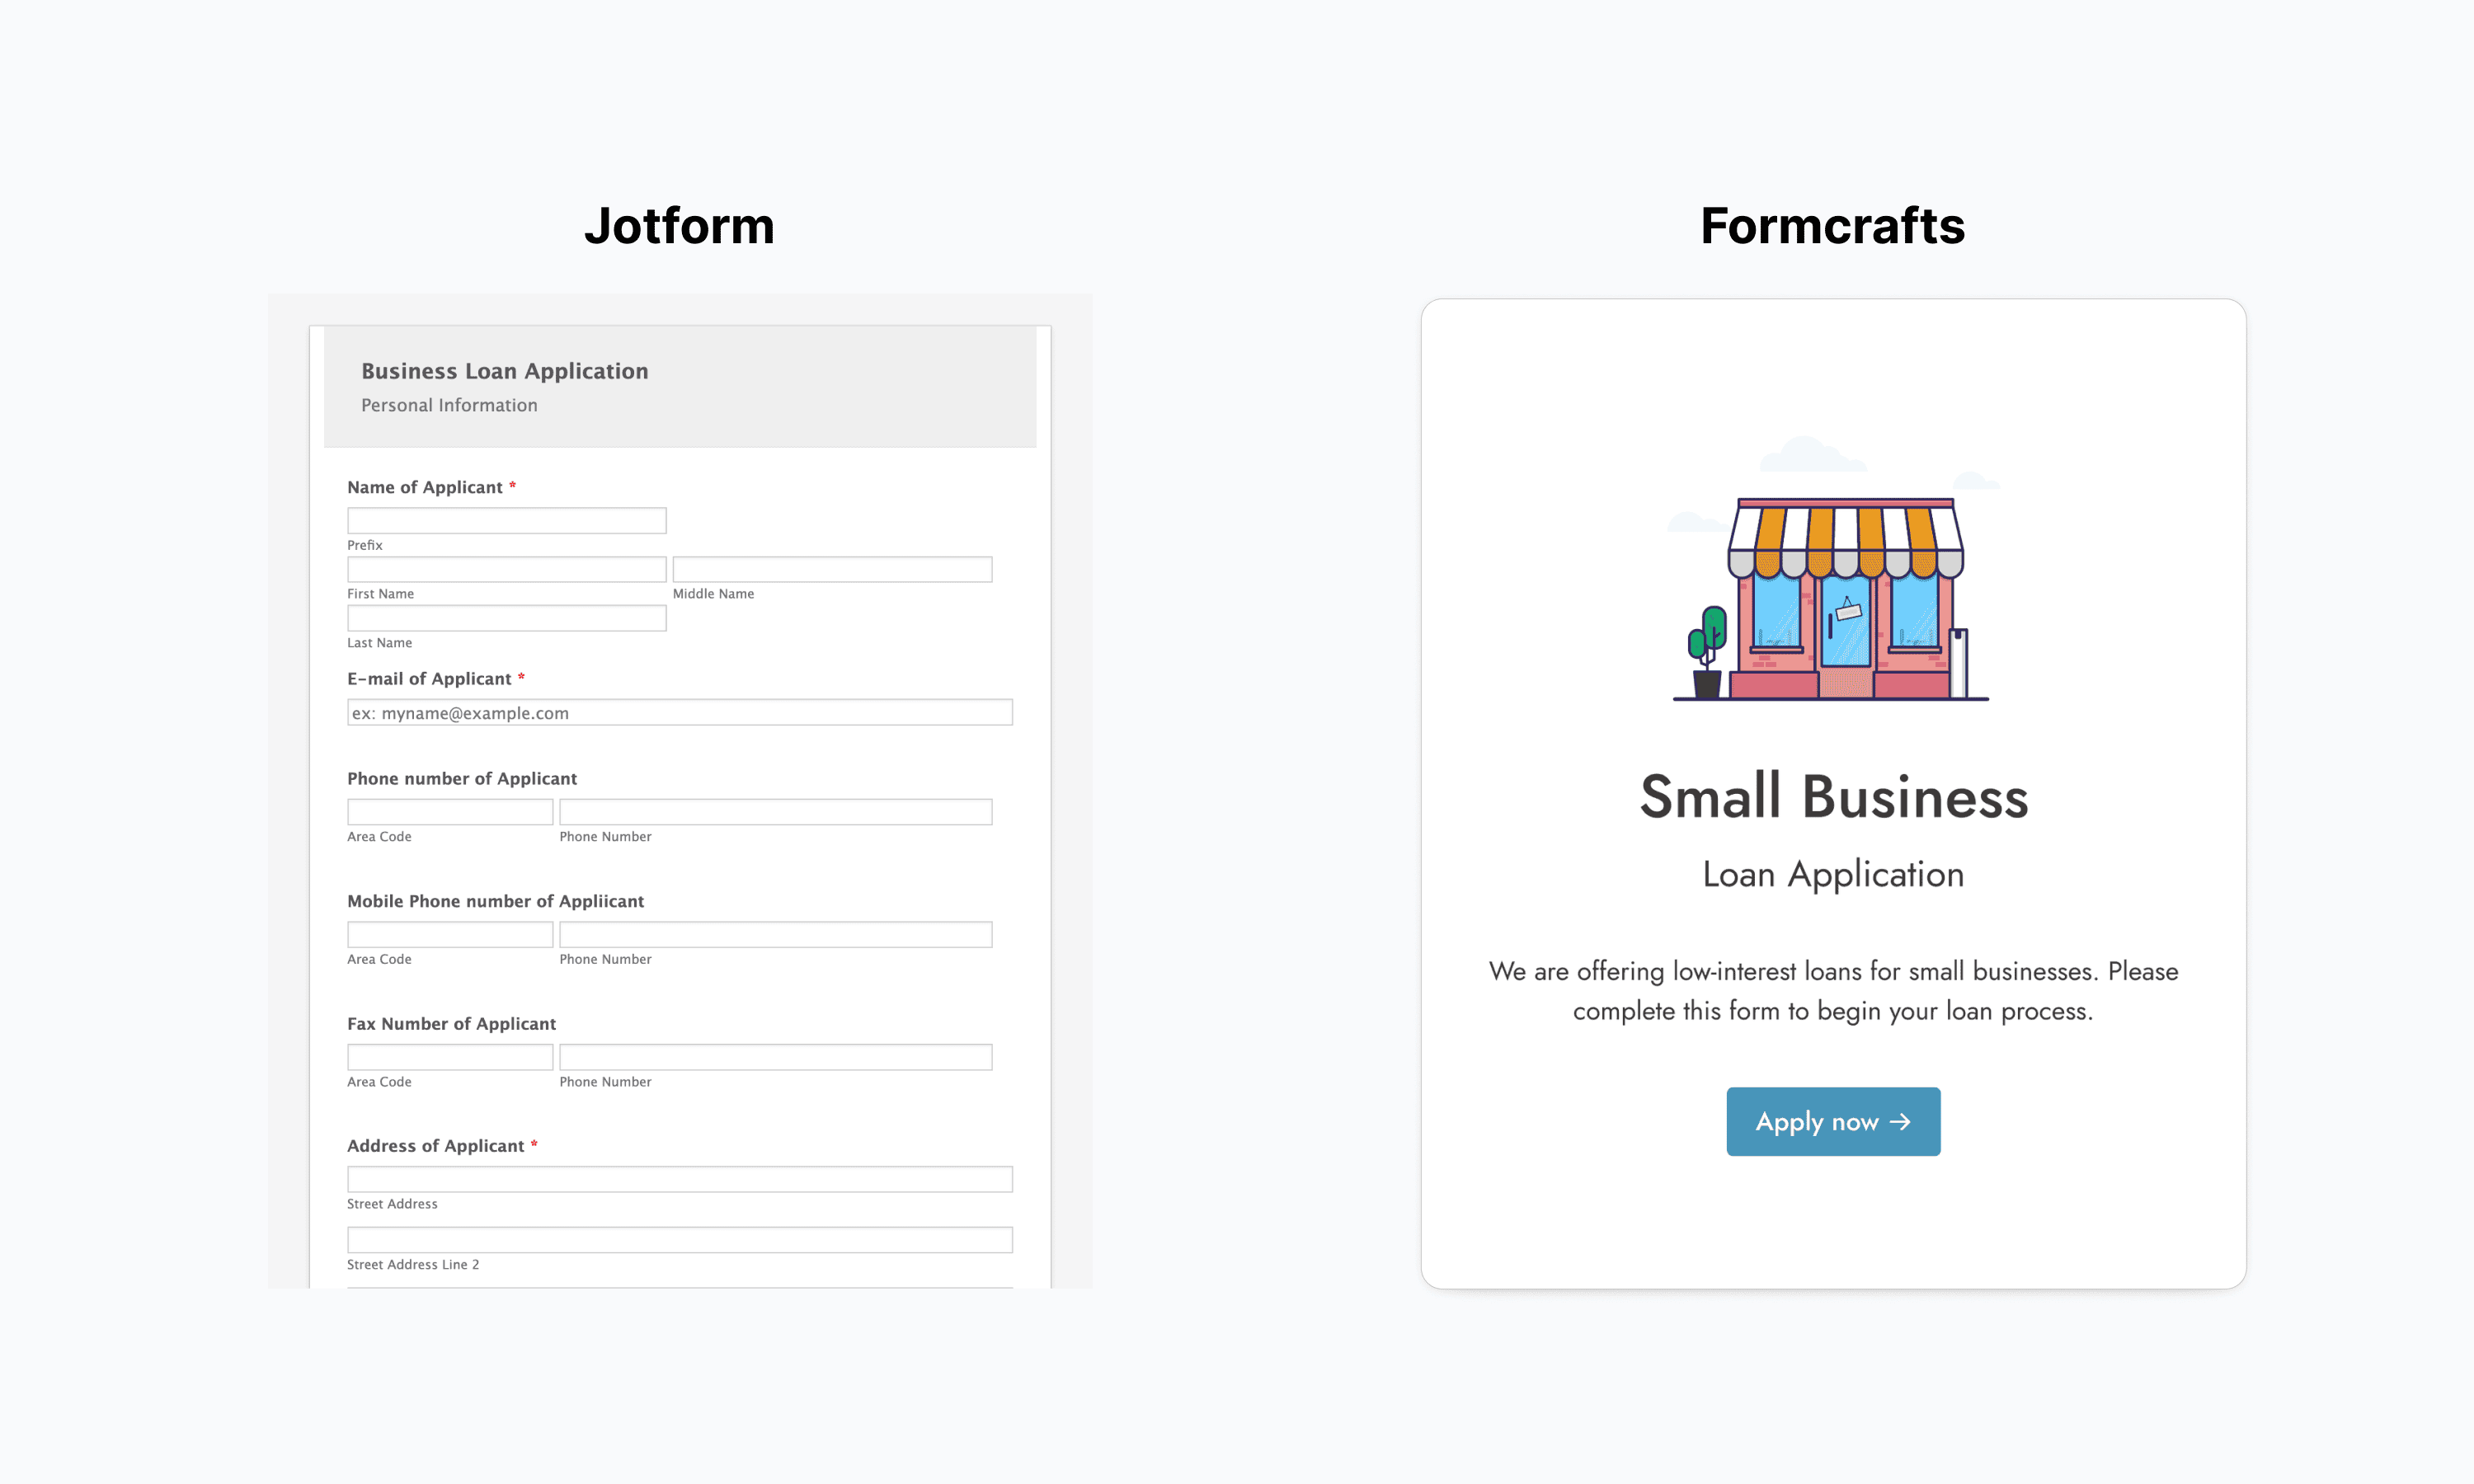 Business loan application forms in Jotform and Formcrafts